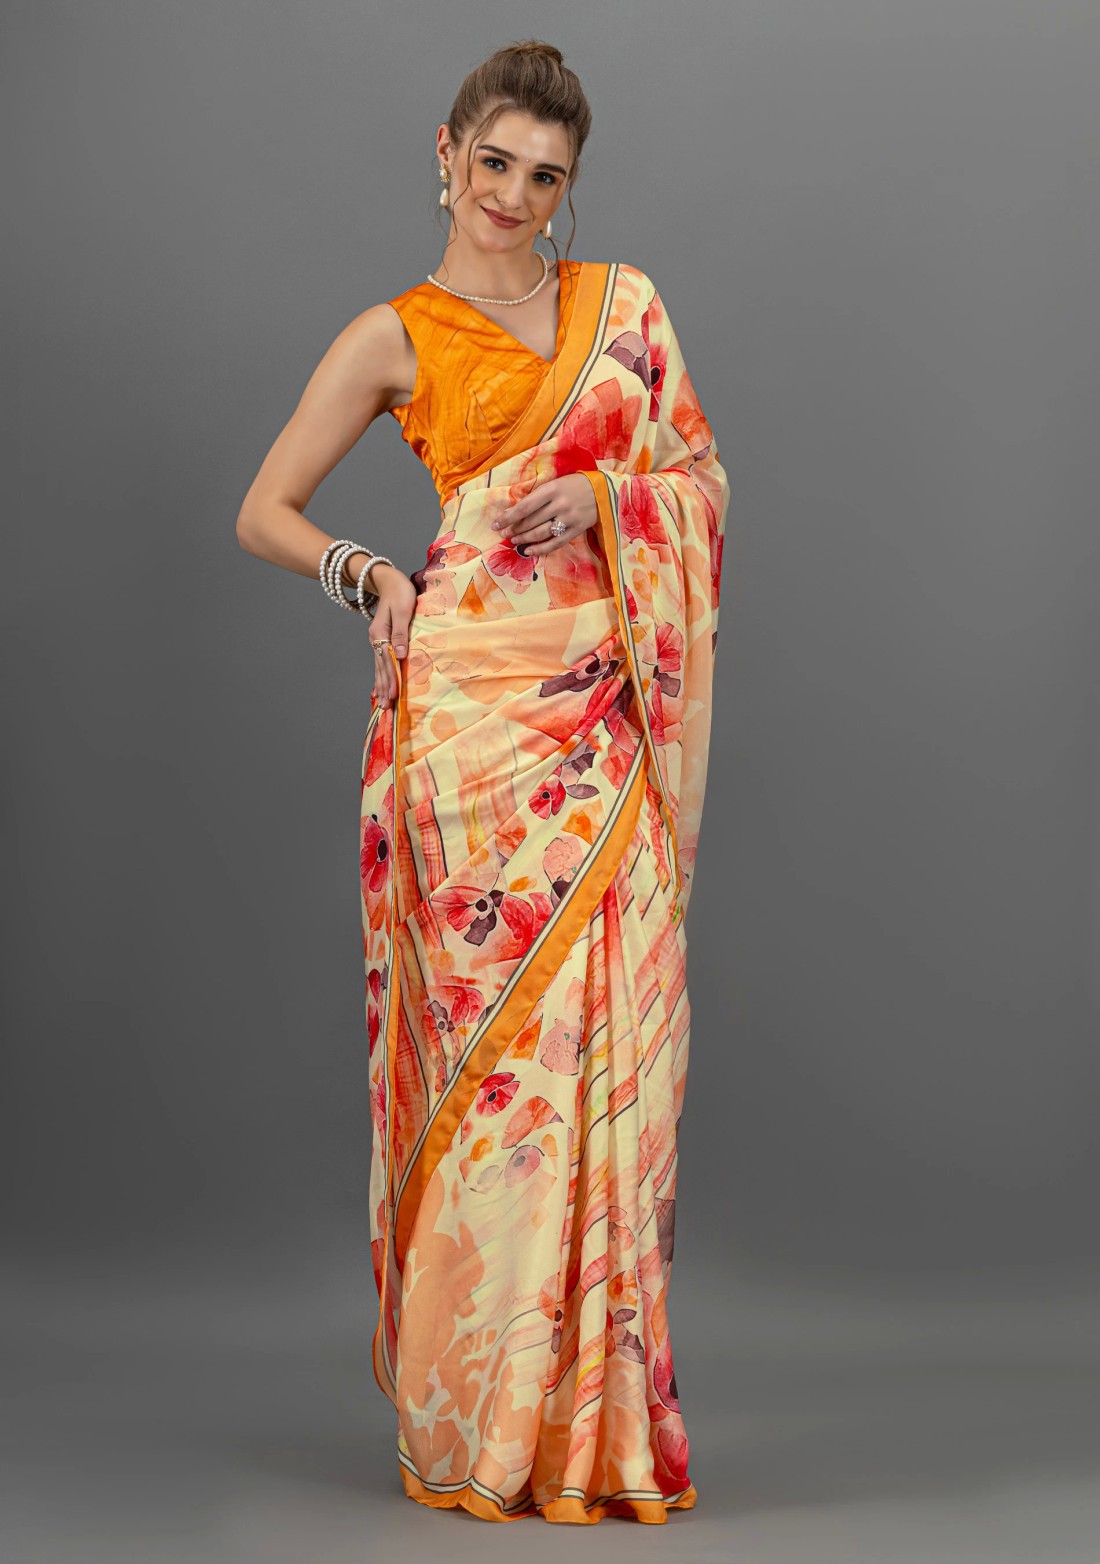 Mango Orange Abstract Floral Printed Lightweight Satin Georgette Saree With Unstitched Blouse